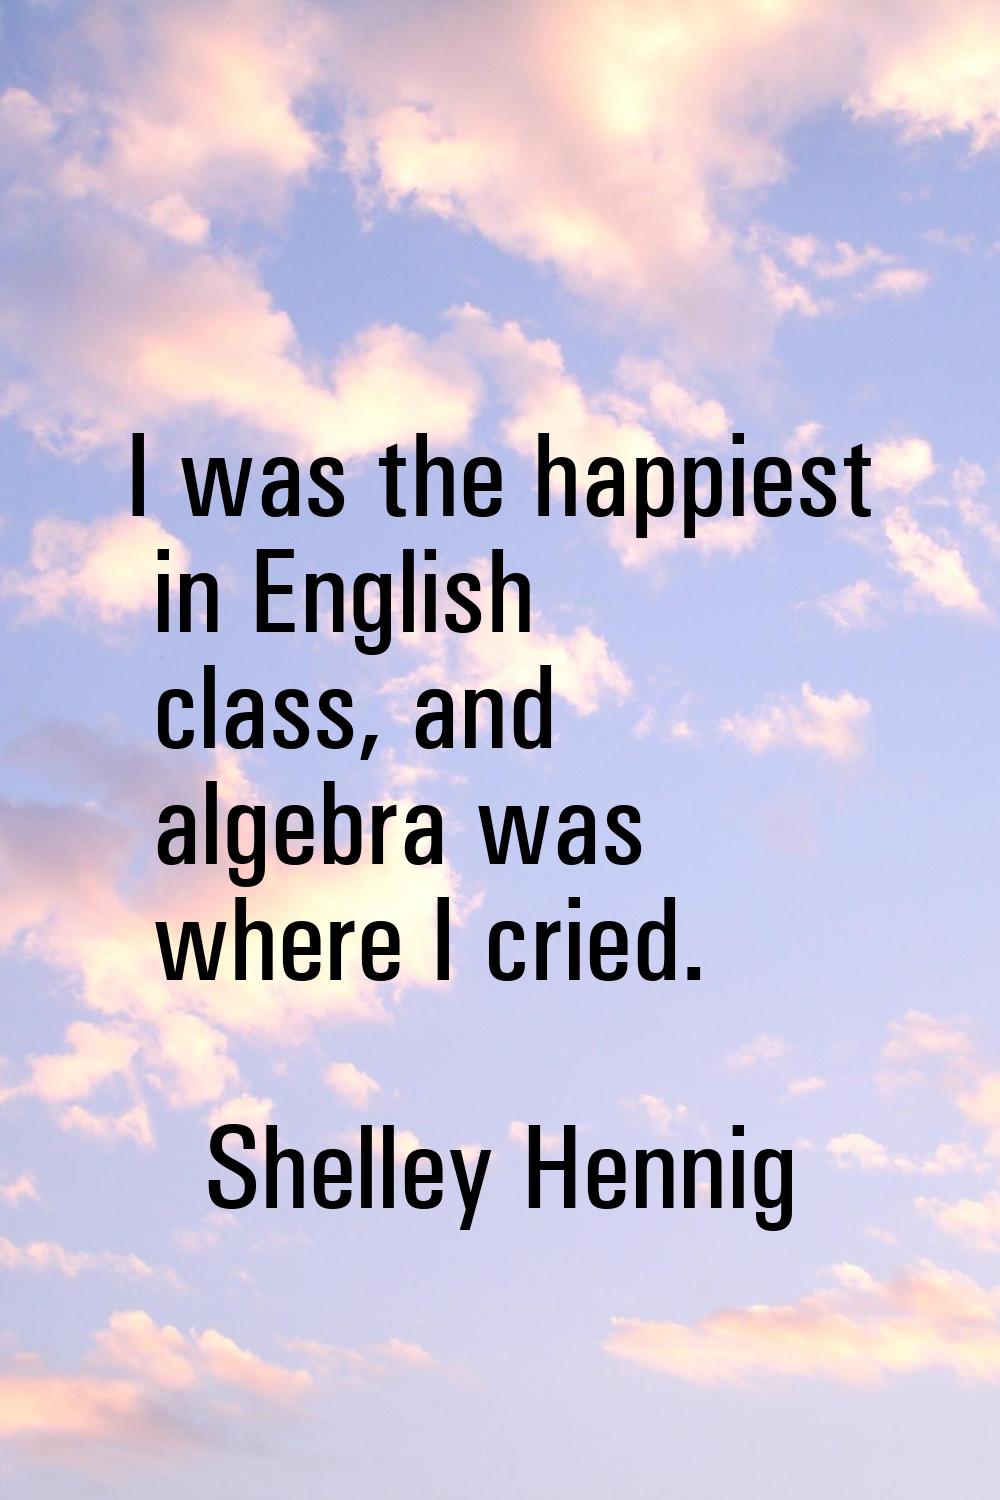 I was the happiest in English class, and algebra was where I cried.